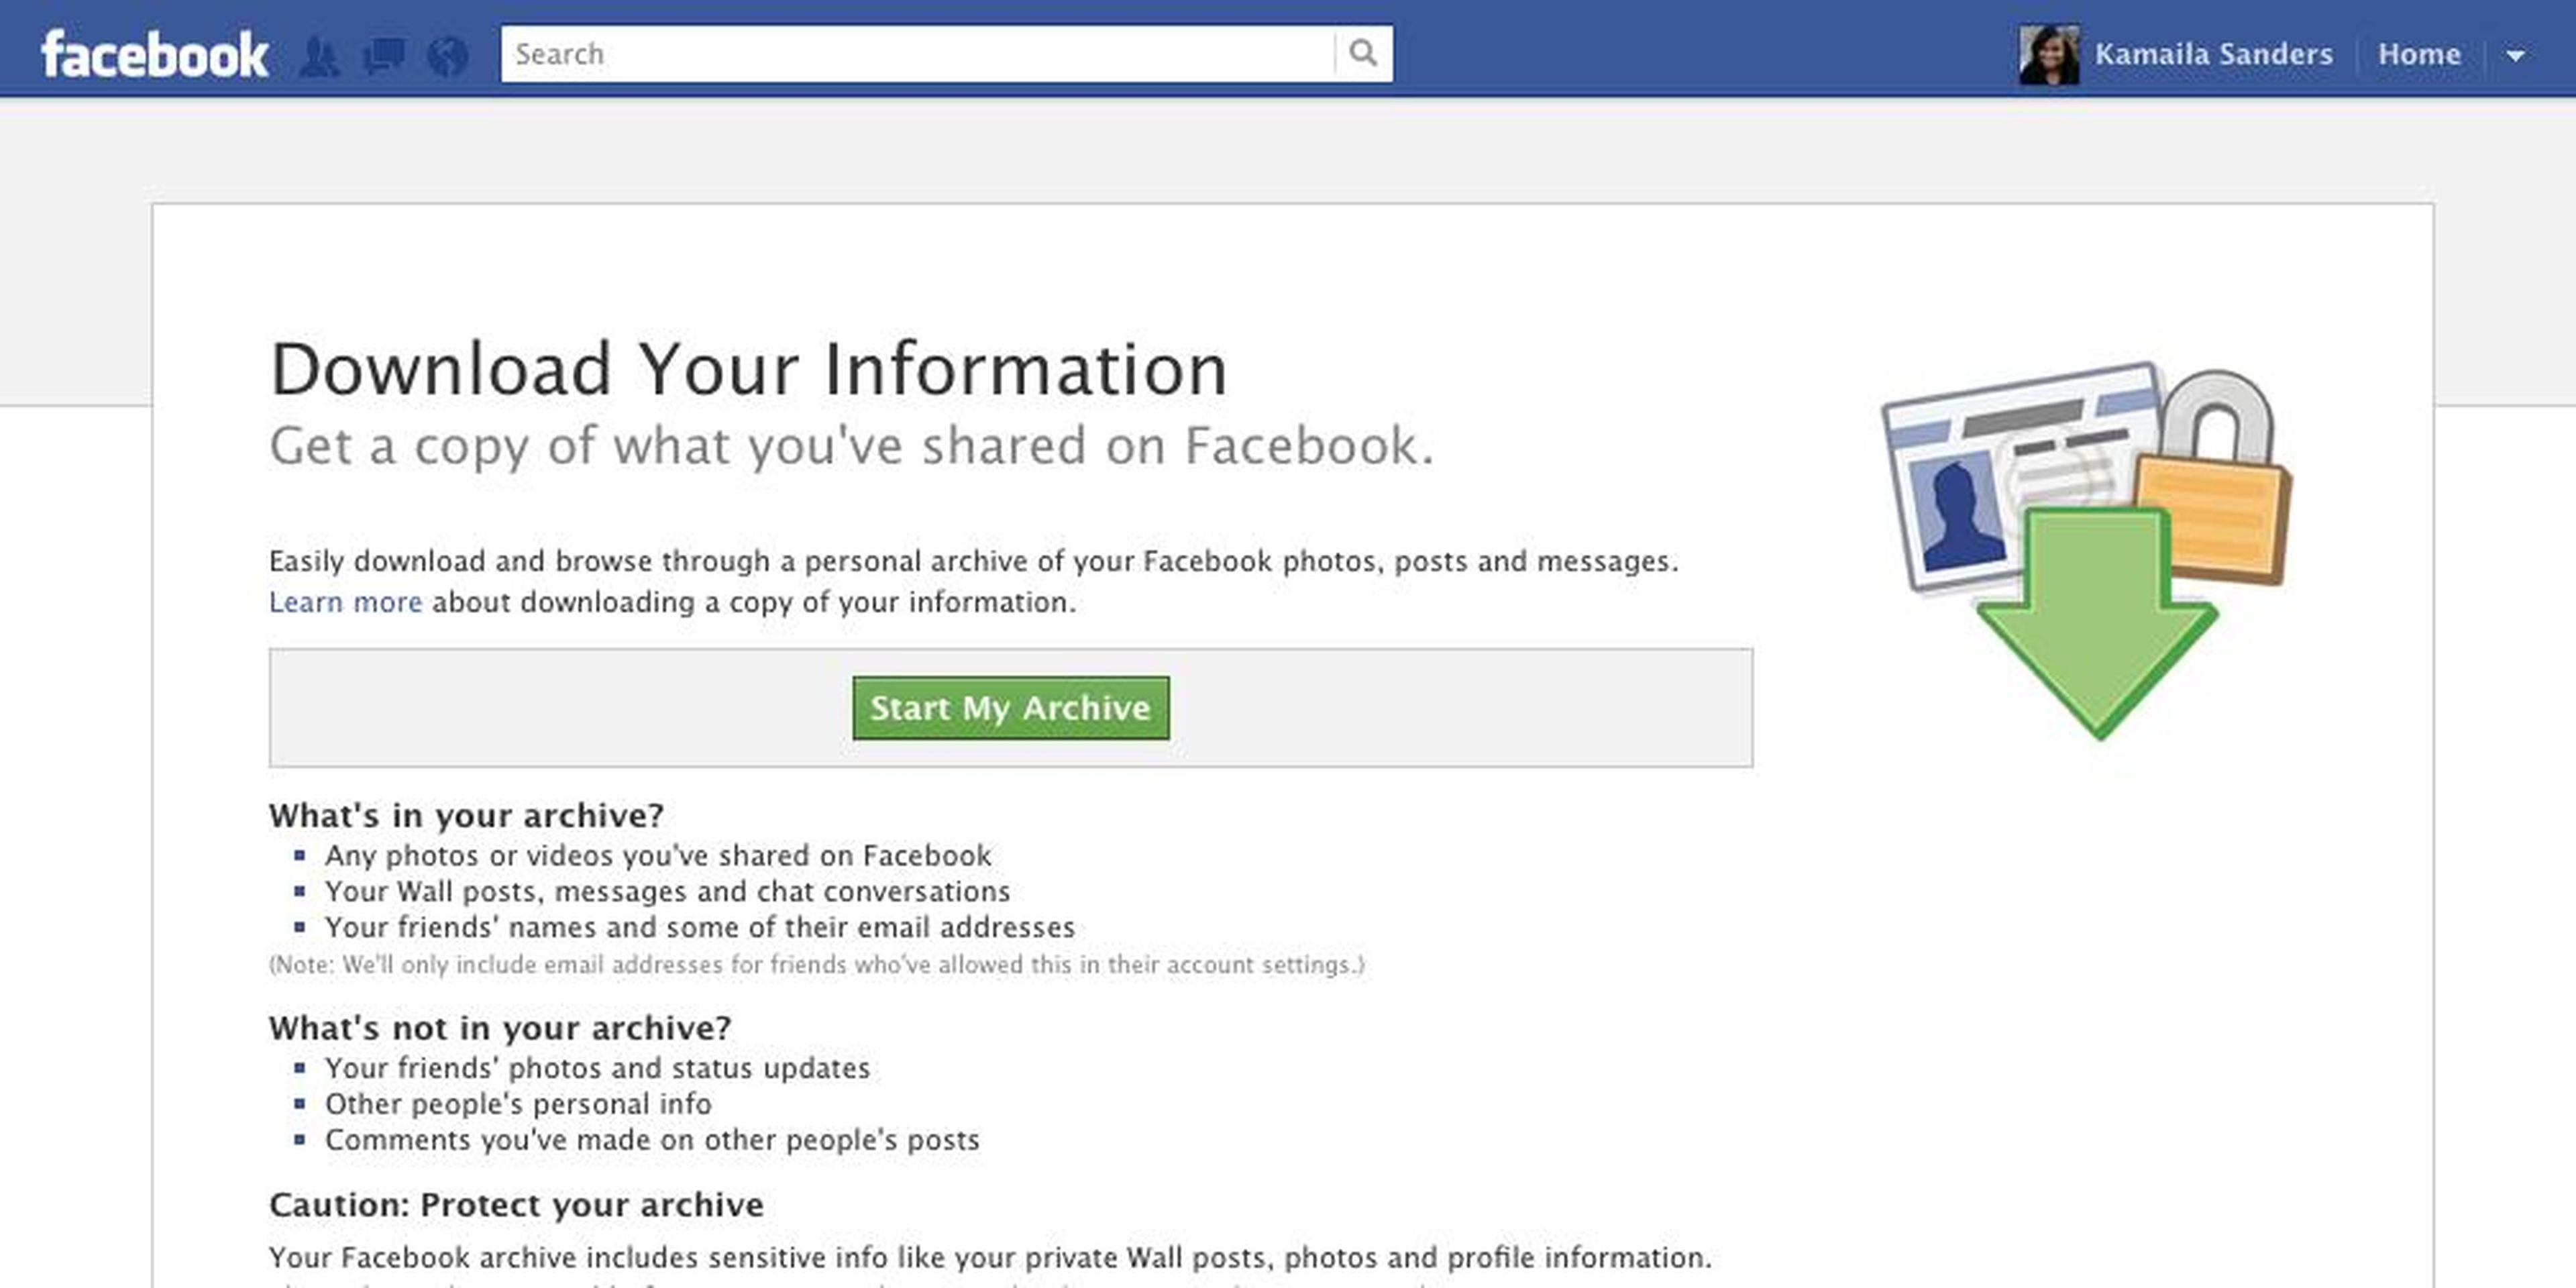 ONE LAST WARNING: You should probably download all your Facebook information before deleting your account.